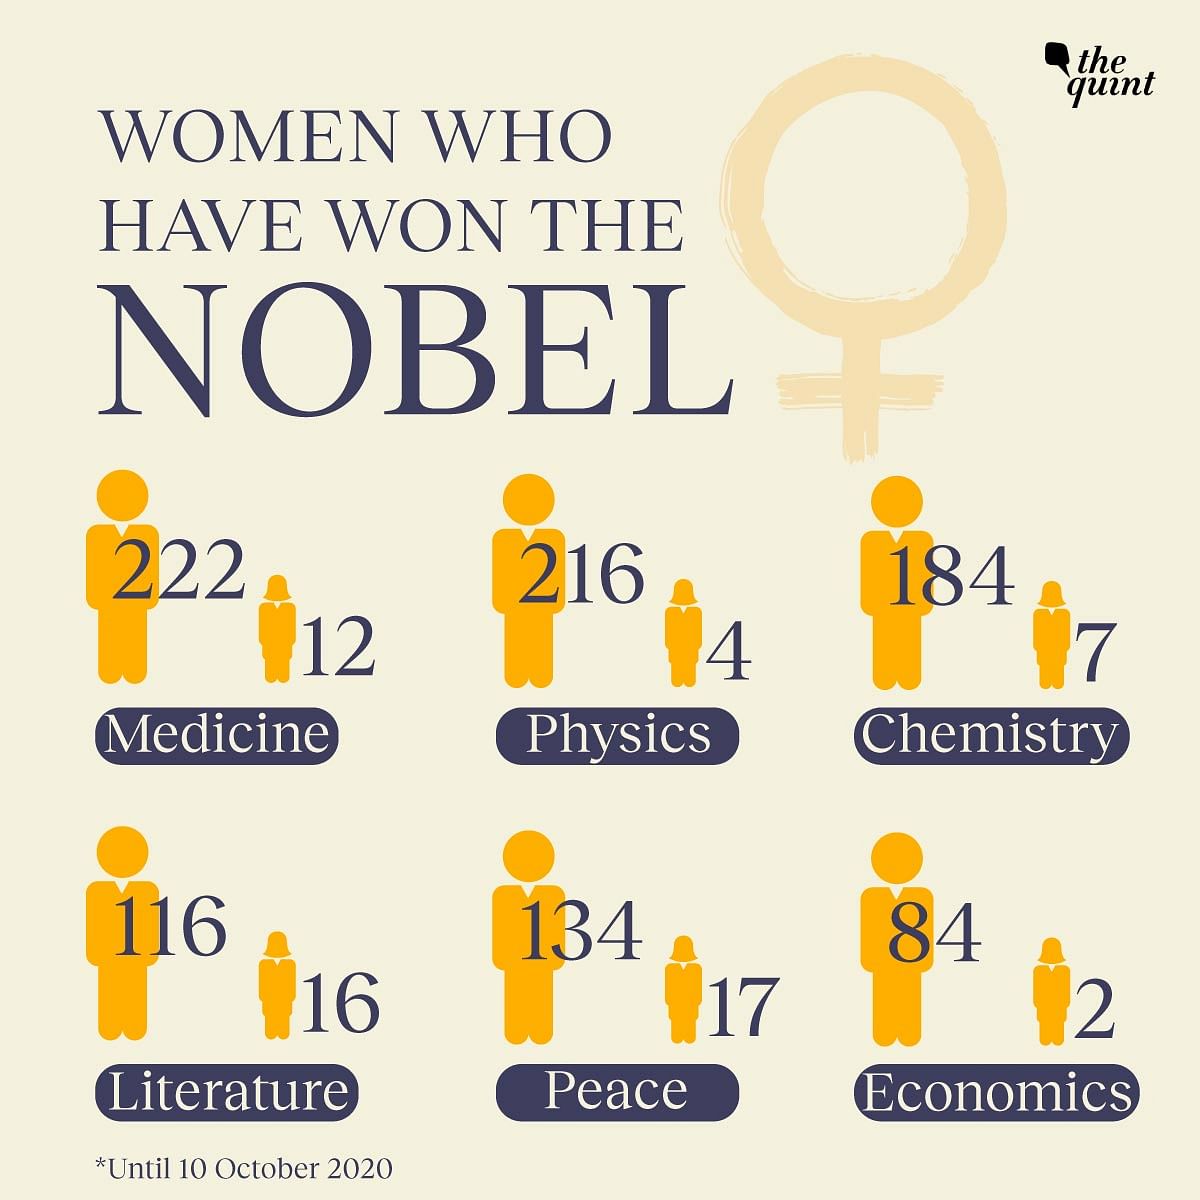 2020 became only the second year in which science prizes were awarded to more than one woman.